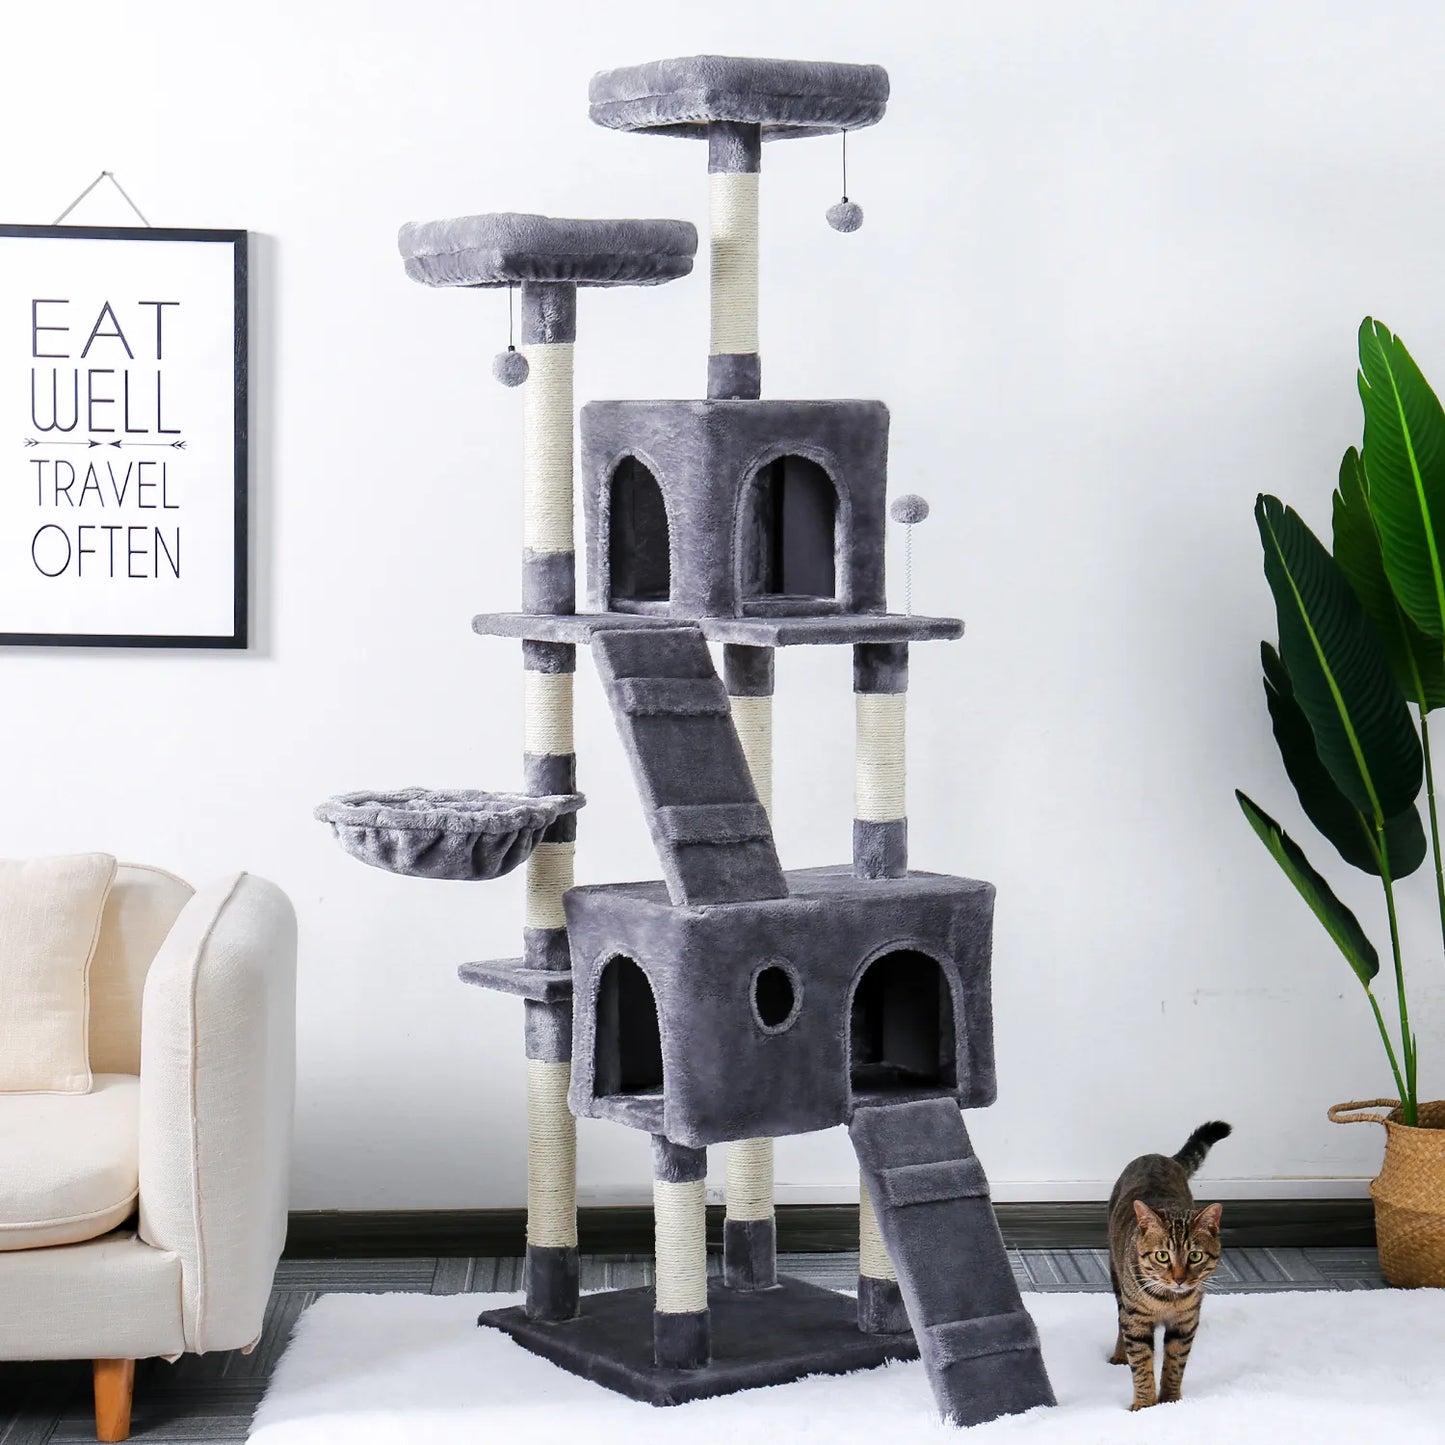 Domestic Delivery Cat Toy House Bed Hanging Balls Tree Kitten Furniture Scratchers Solid Wood for Cats Climbing Frame Cat Condos